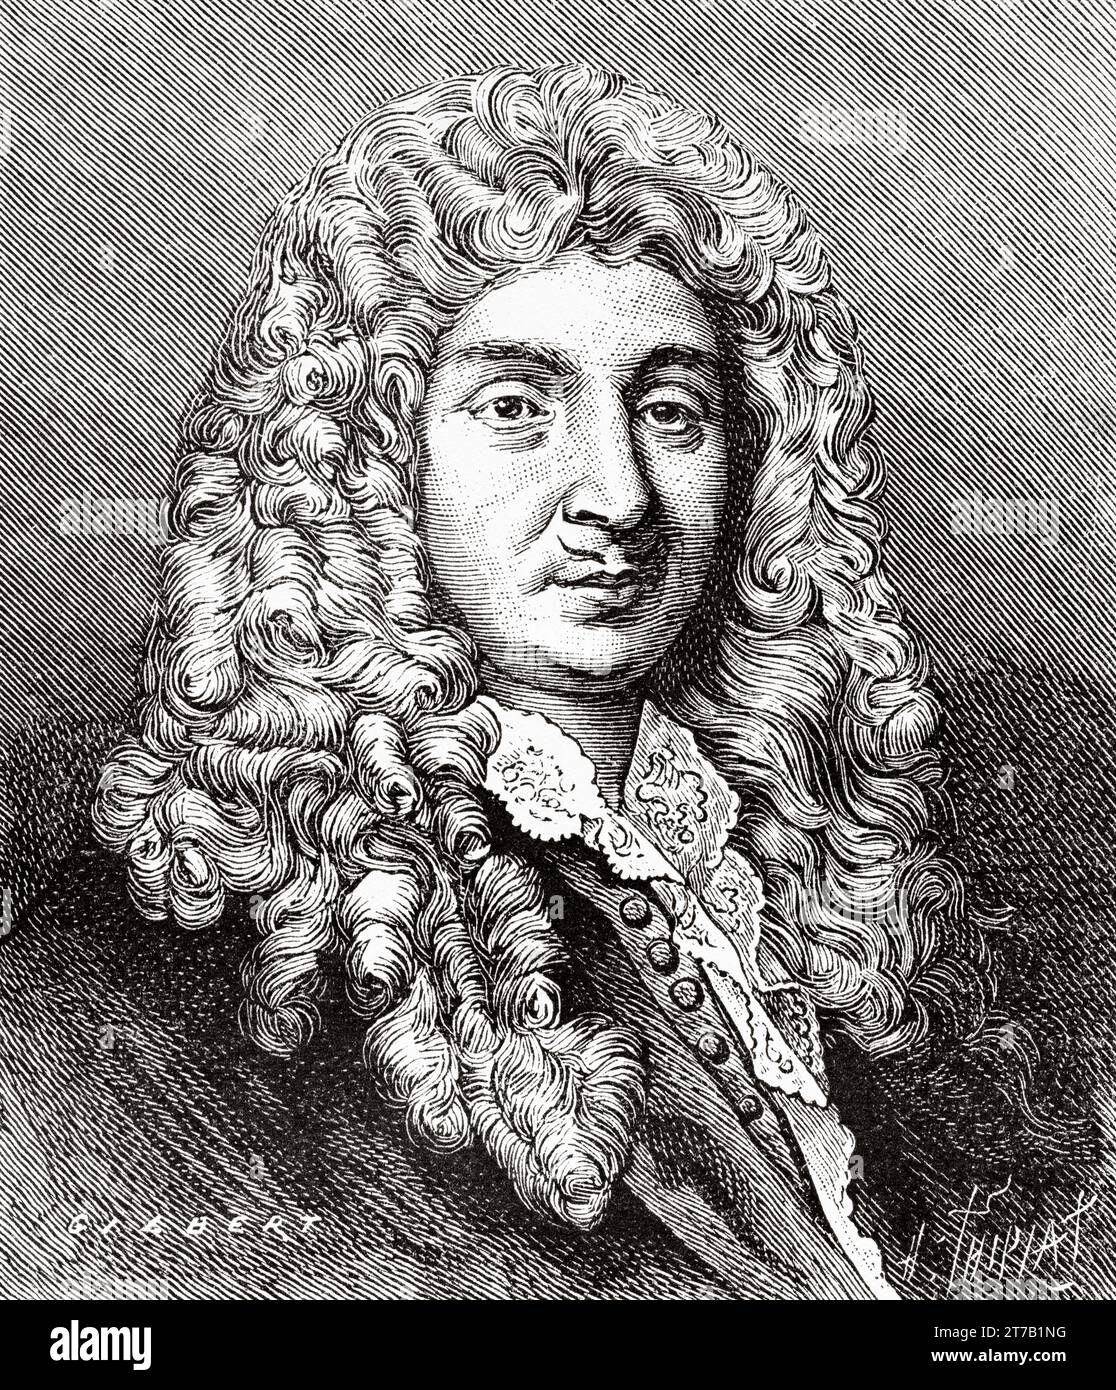 Portrait of Jean-Baptiste Lully (1632-1687) was an Italian naturalized French composer, guitarist, violinist, and dancer who is considered a master of the French Baroque music style. Best known for his operas, he spent most of his life working in the court of Louis XIV of France and became a French subject in 1661, France. Old illustration from La Nature 1887 Stock Photo